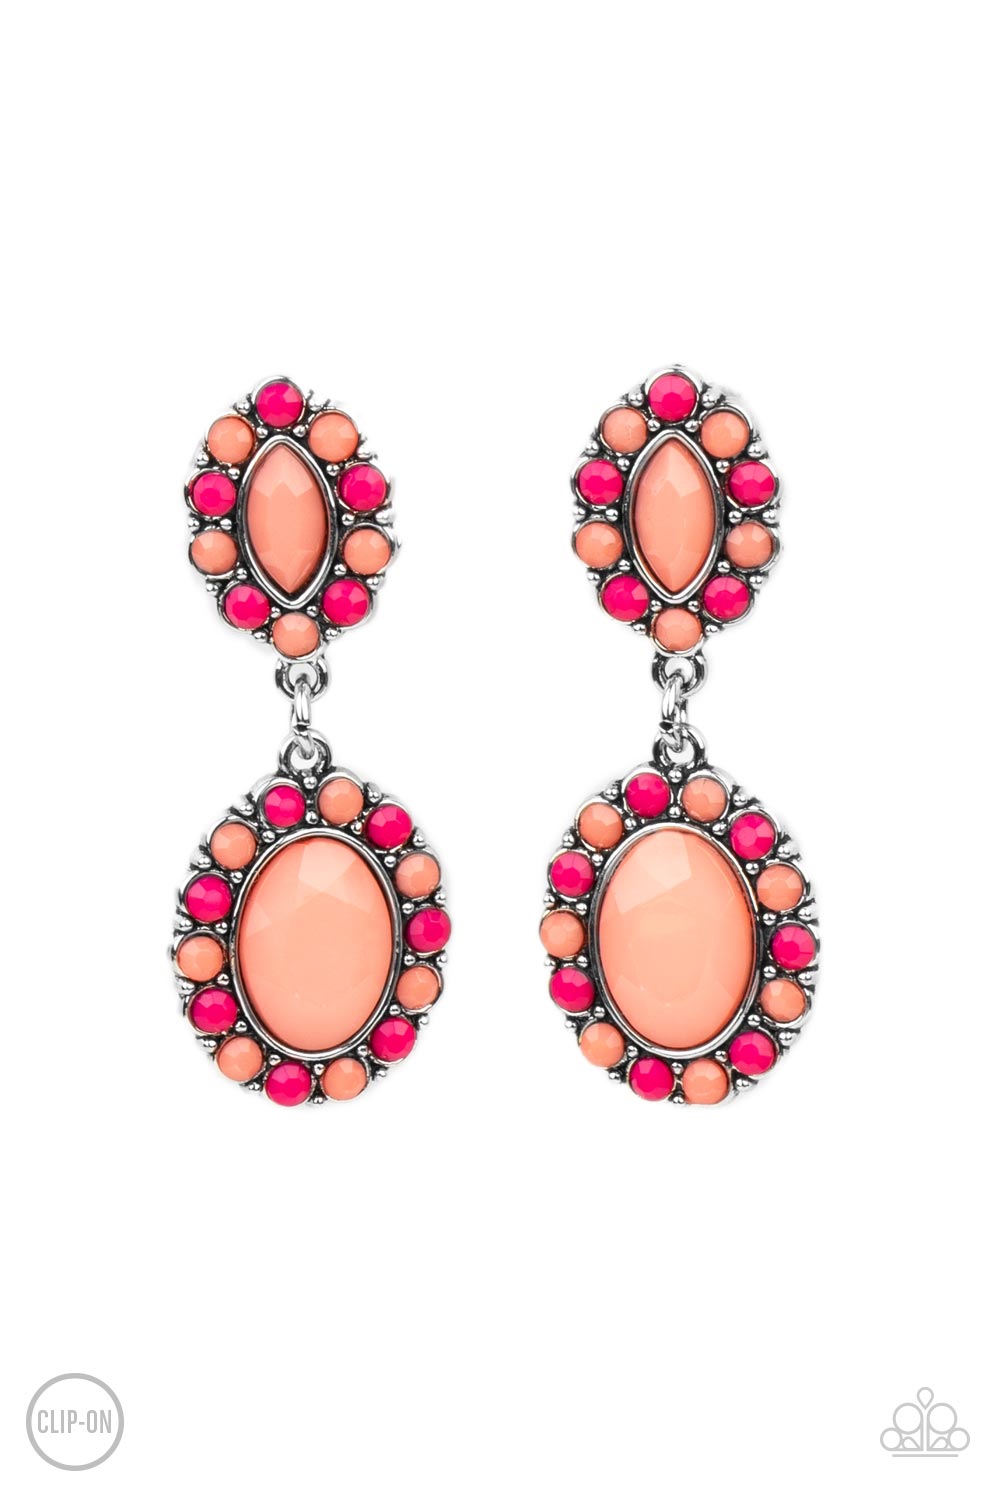 Positively Pampered - Orange Paparazzi Clip-on Earrings